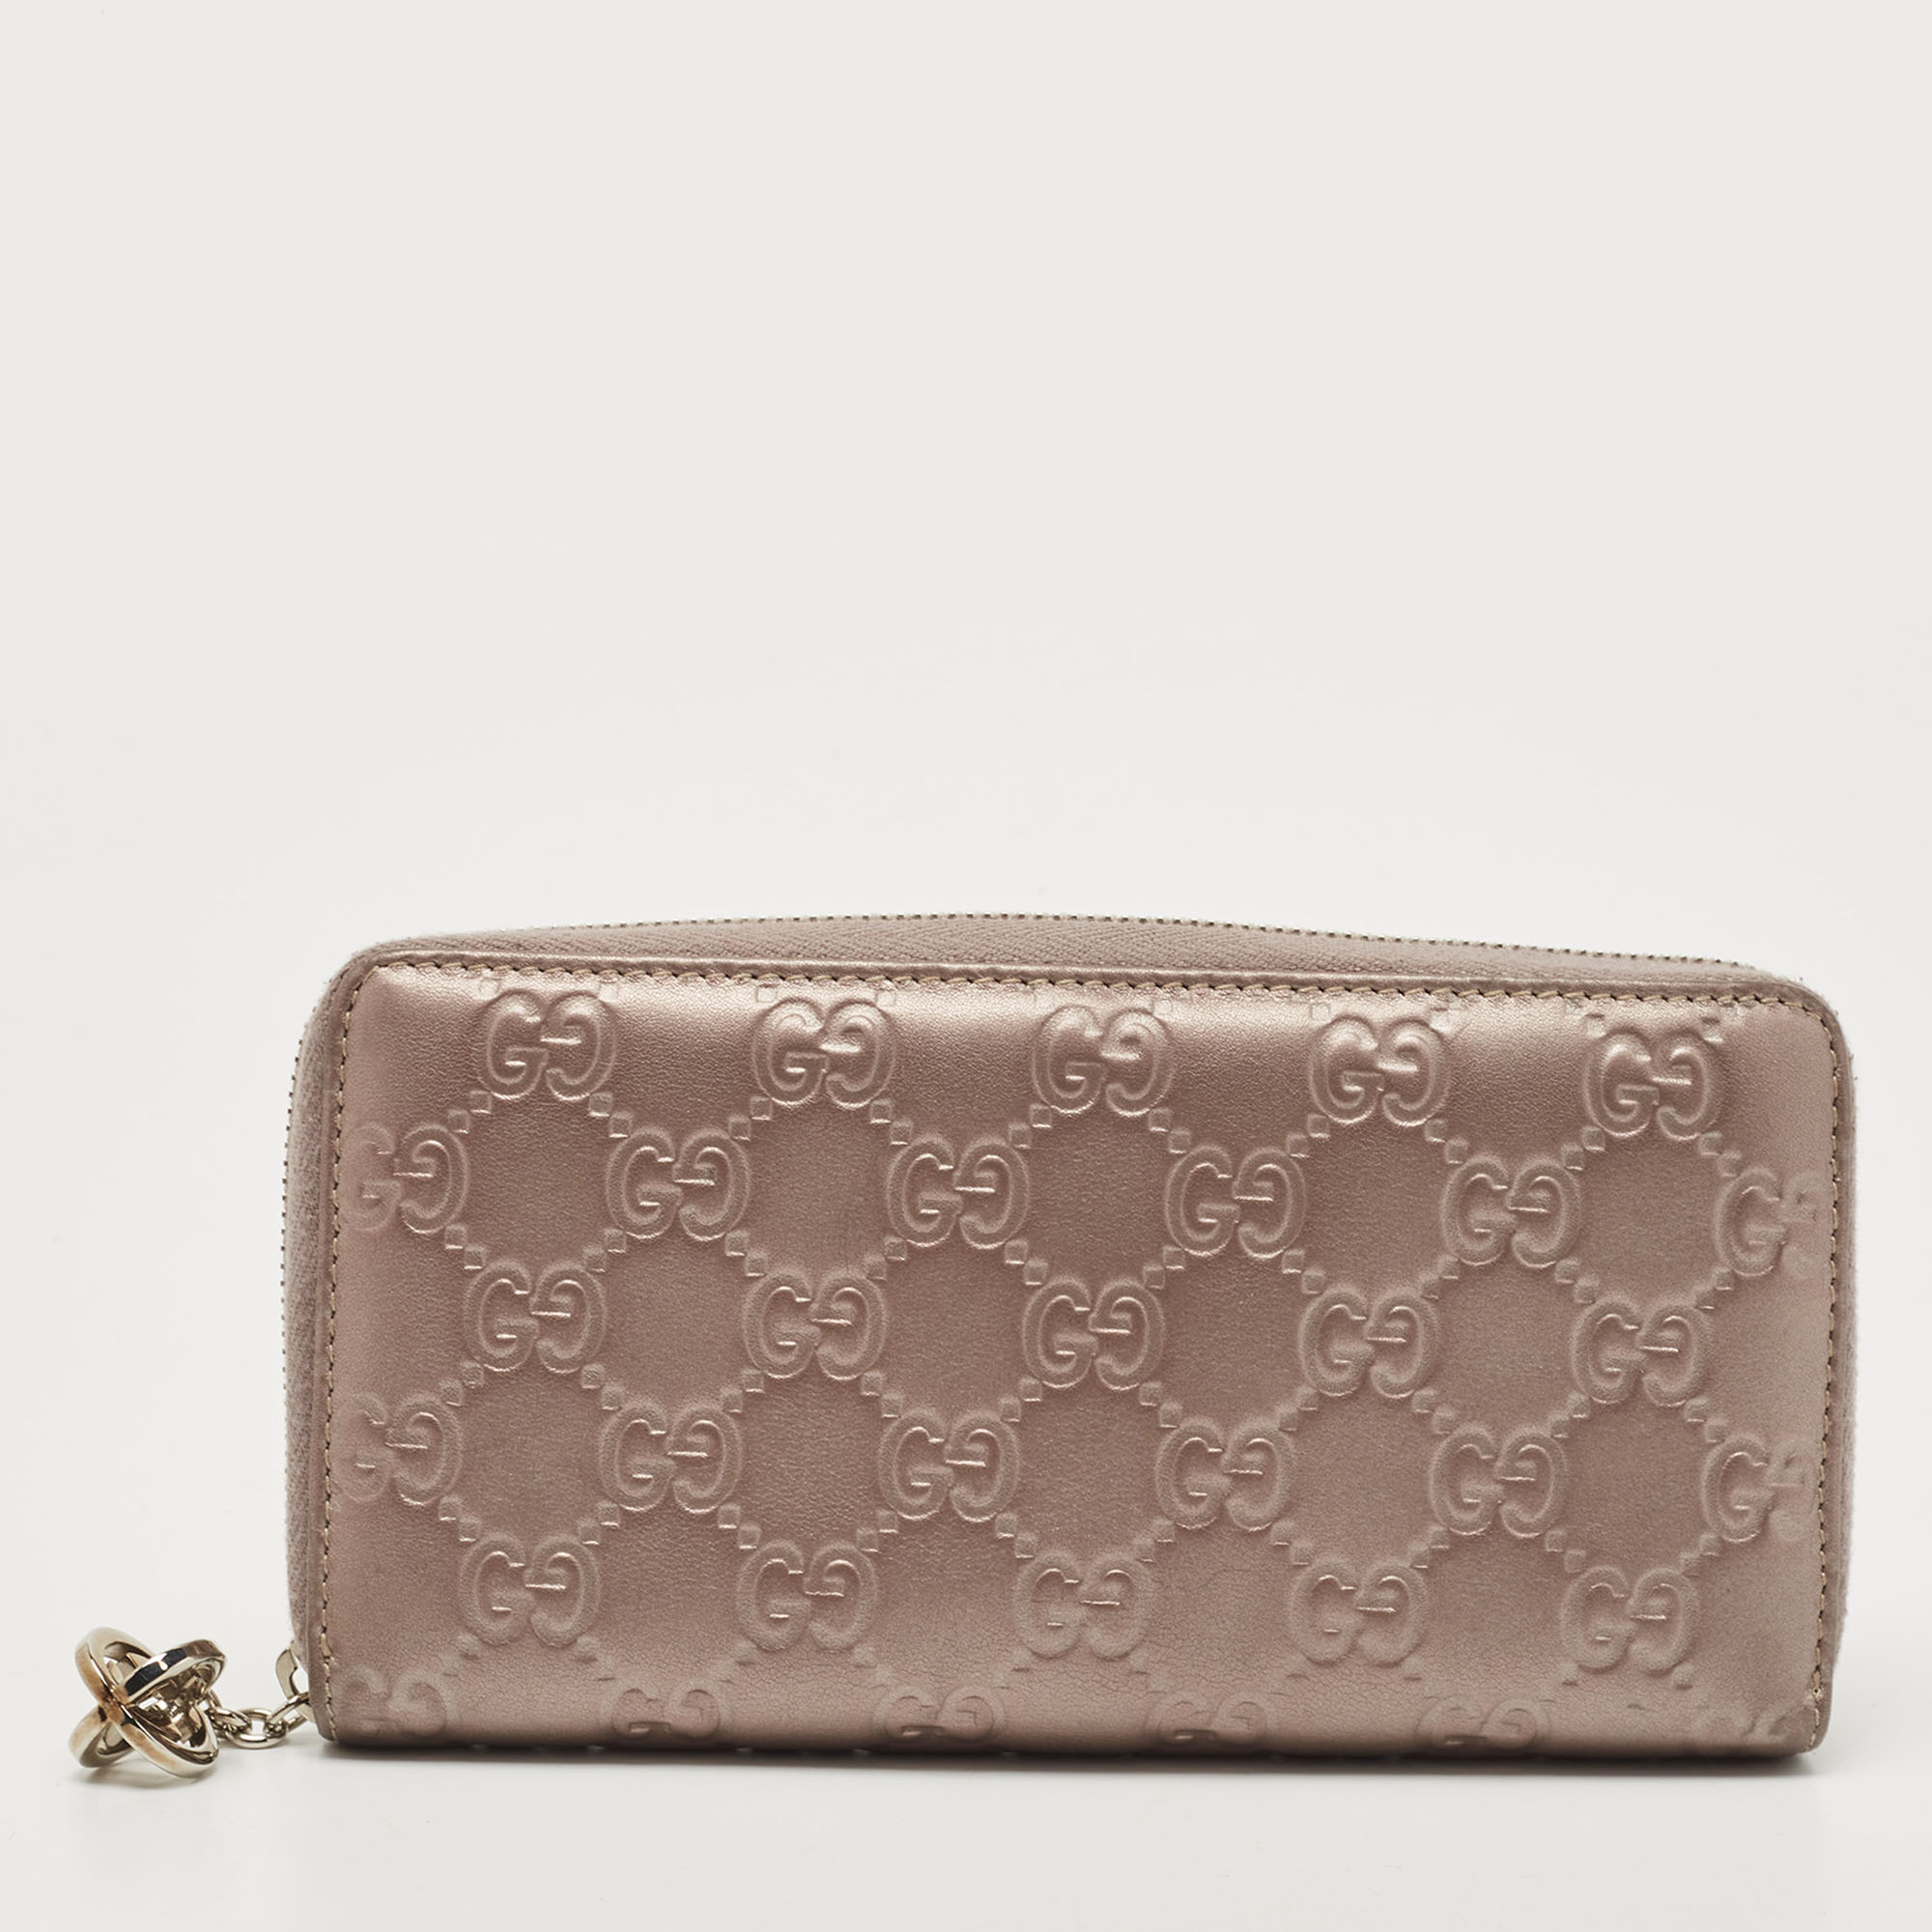 Gucci Metallic Lilac Guccissima Leather Zip Around Wallet